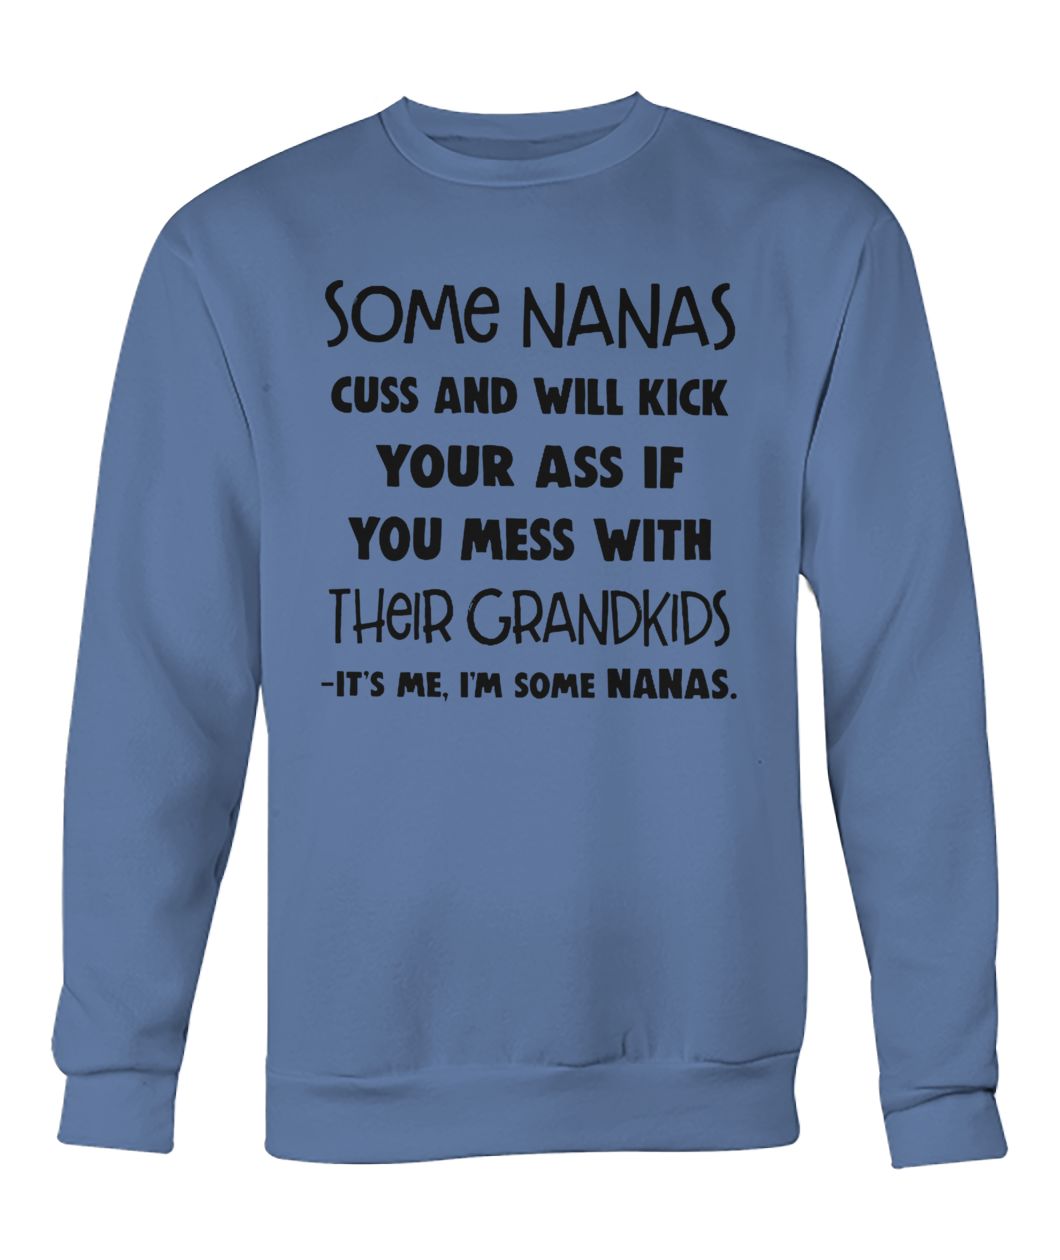 Some nanas cuss and will kick your ass if you mess with their grandkids crew neck sweatshirt